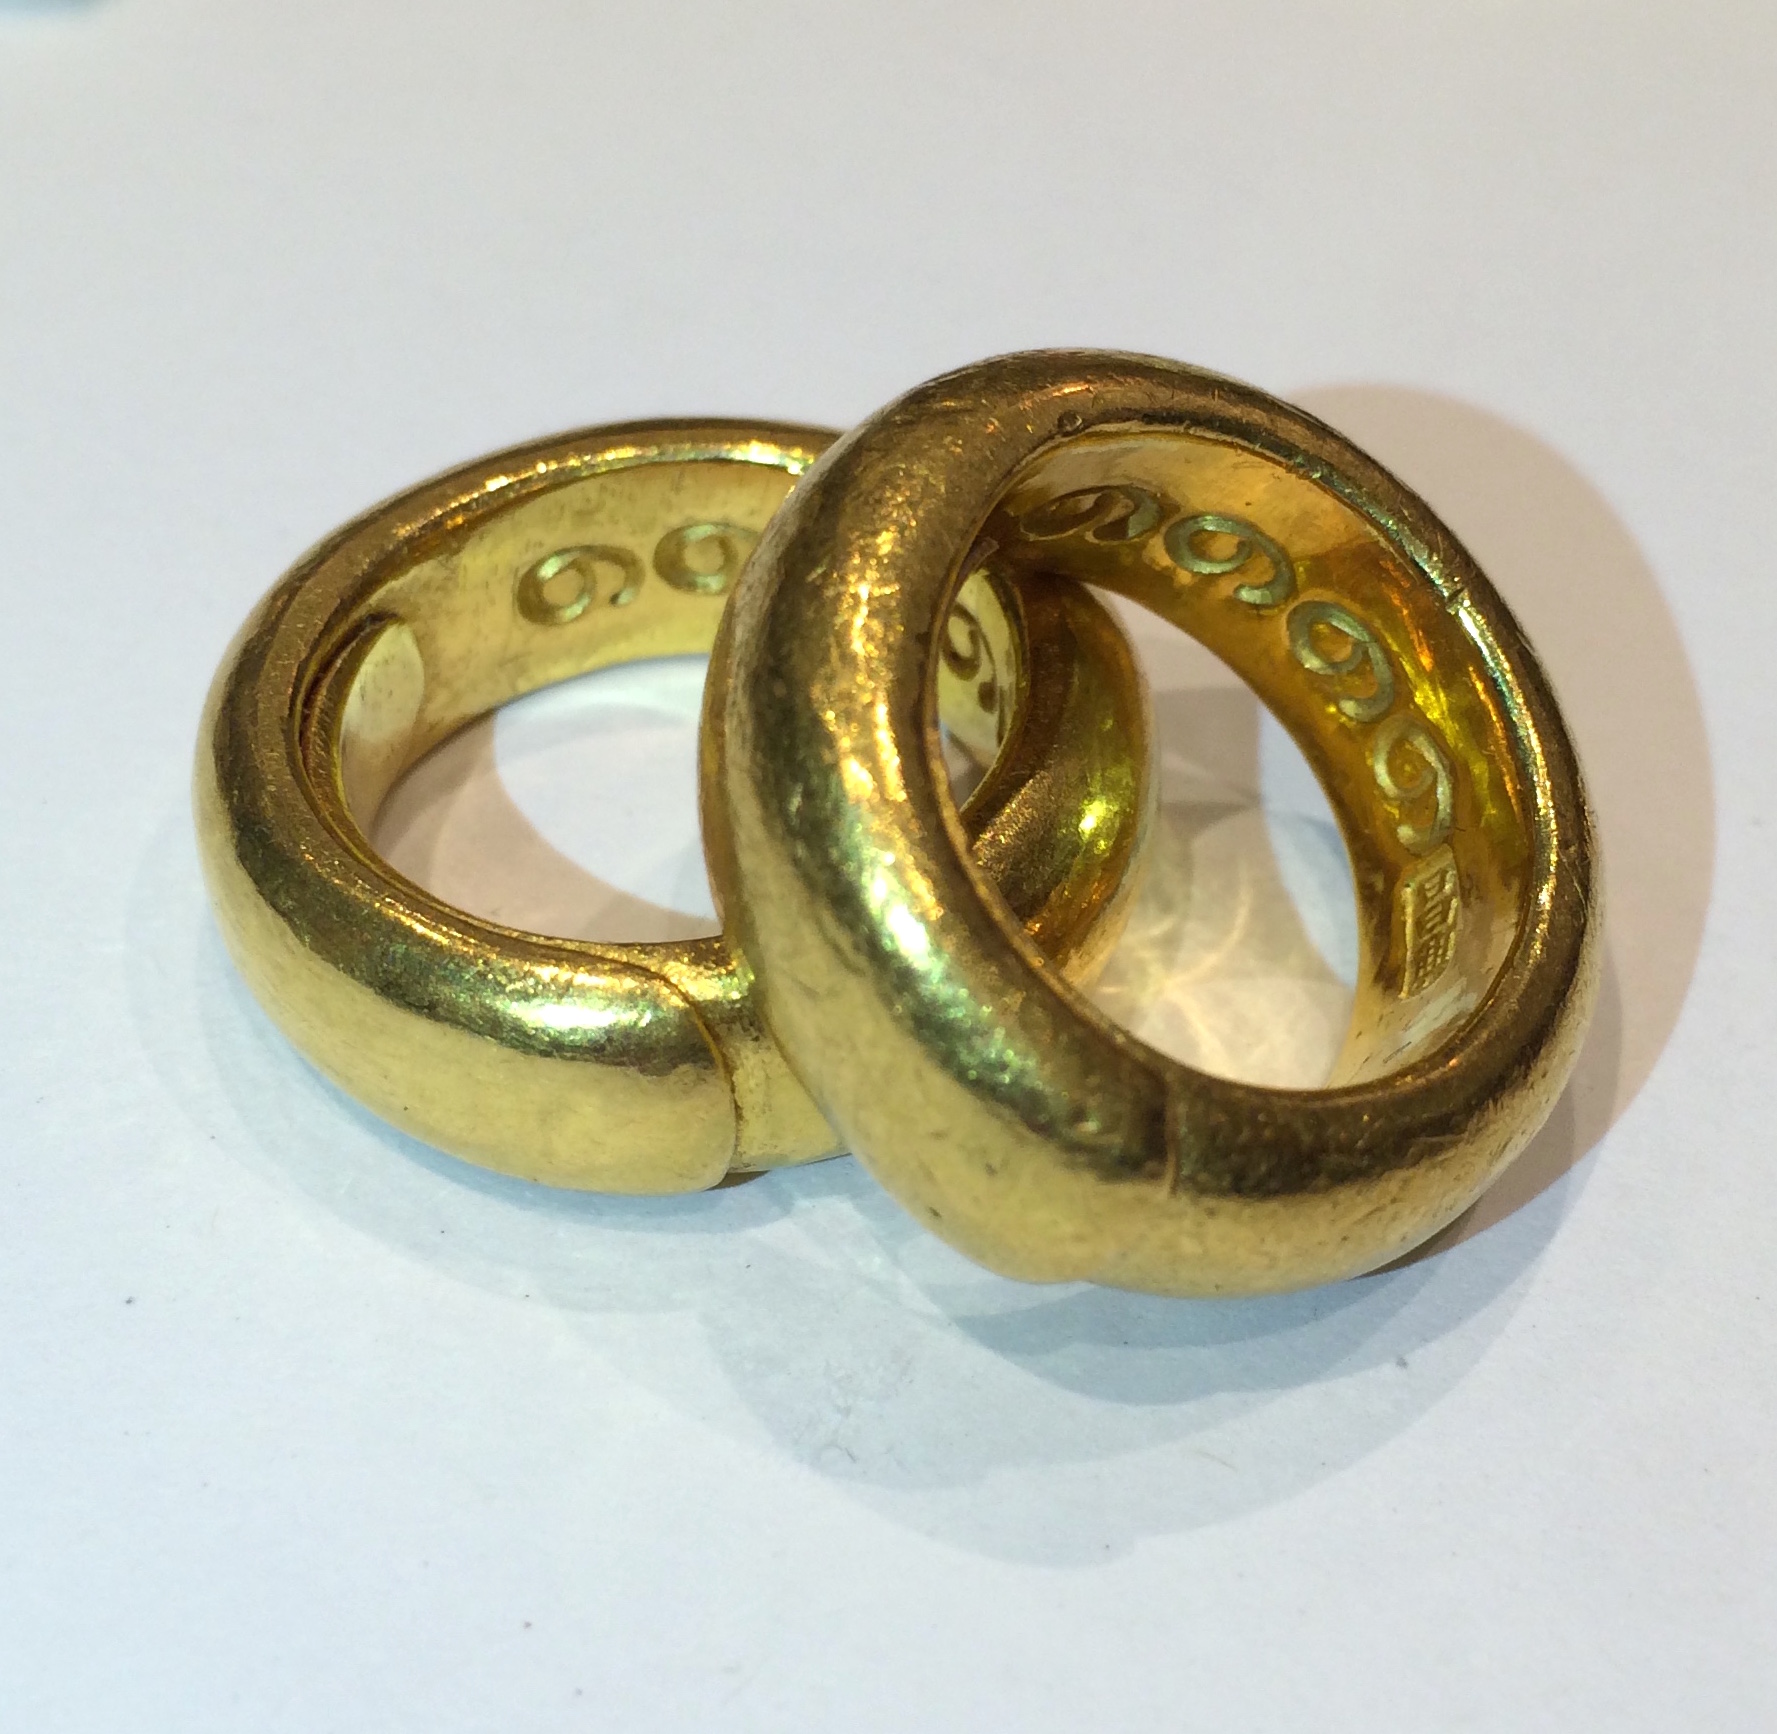 Chinese “Good Luck” 24k gold (9999 fine quality) wrap over design rings, signed, c.1970’s (Size 5 1/2 & 7)